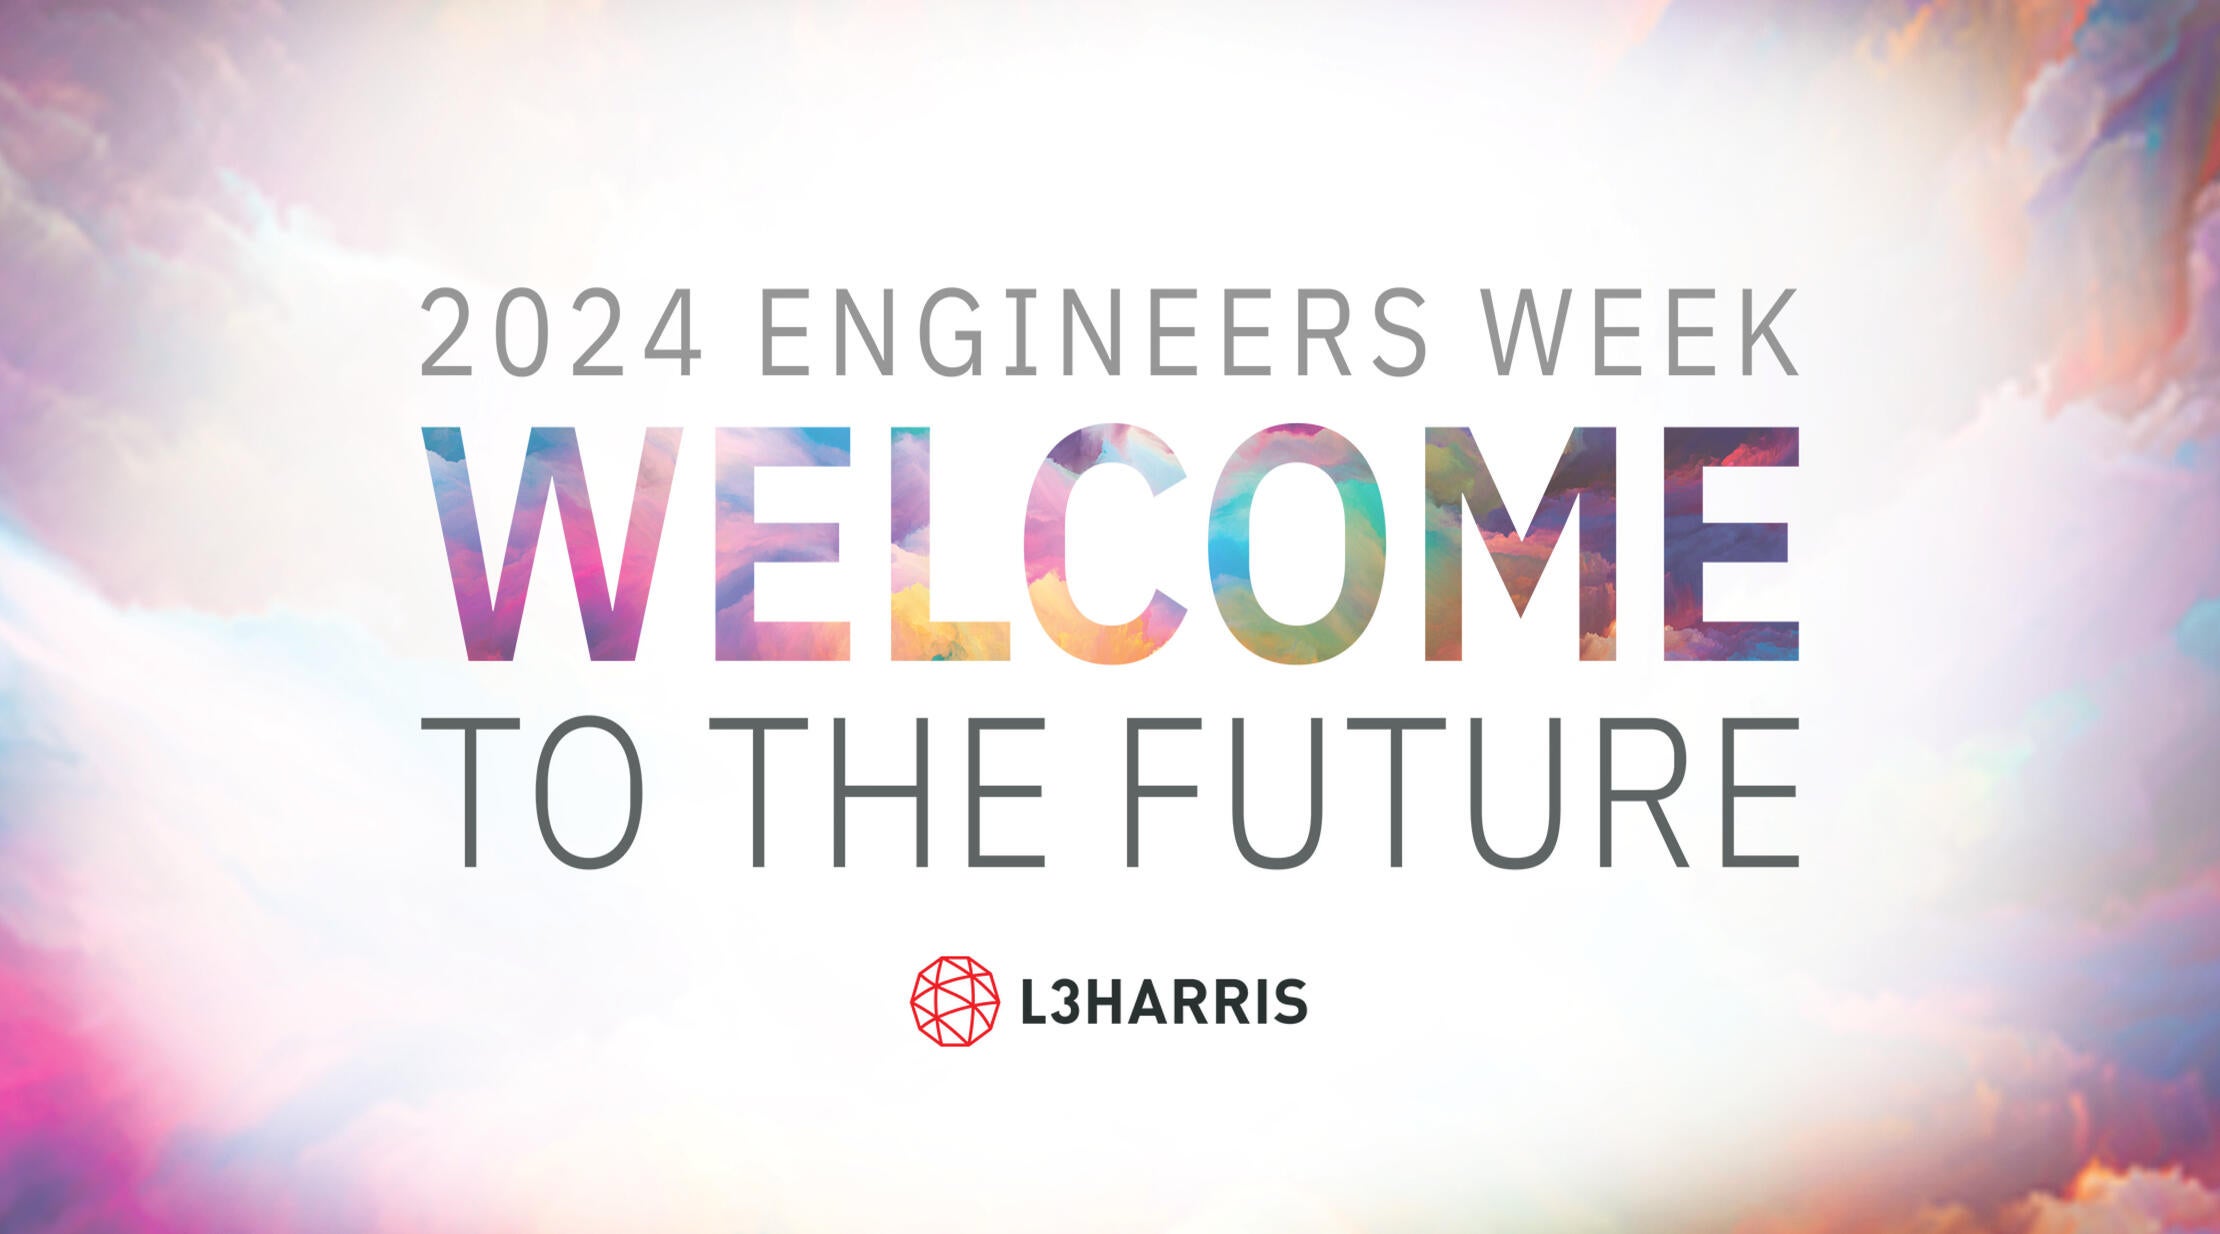 2024 Engineers Week banner with theme of "Welcome to the Future"